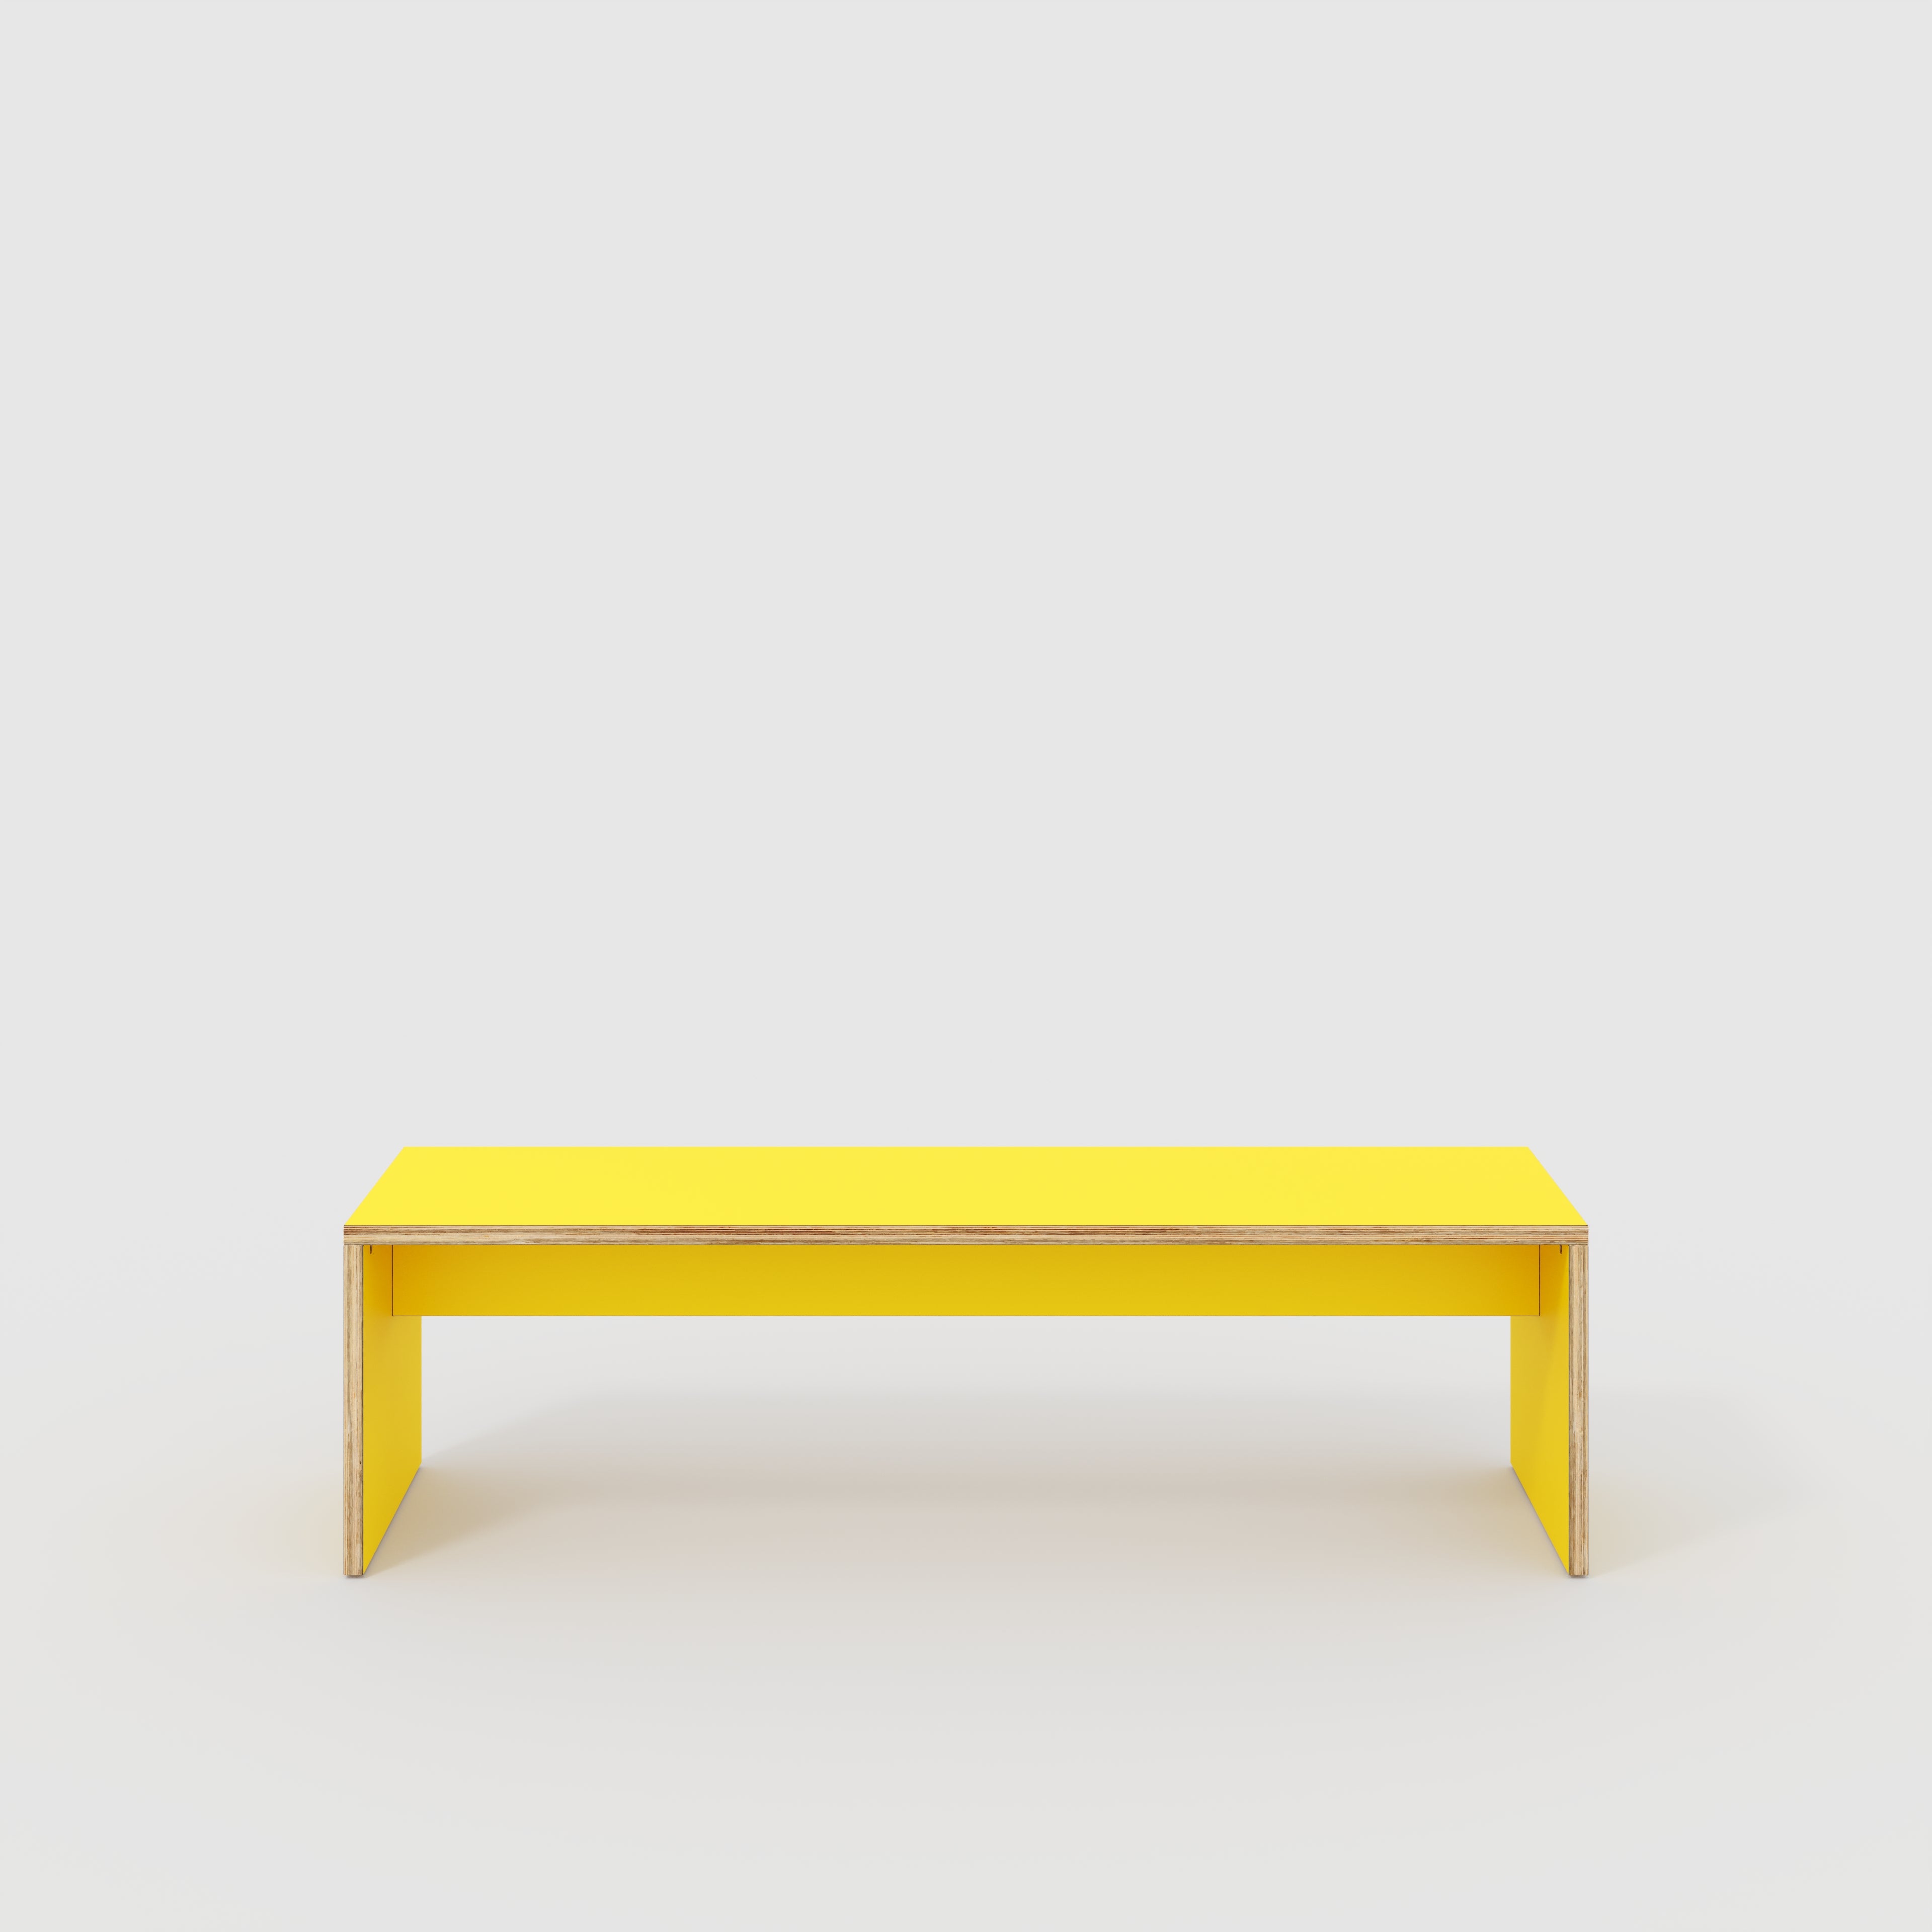 Bench Seat with Solid Sides - Formica Chrome Yellow - 1600(w) x 400(d)